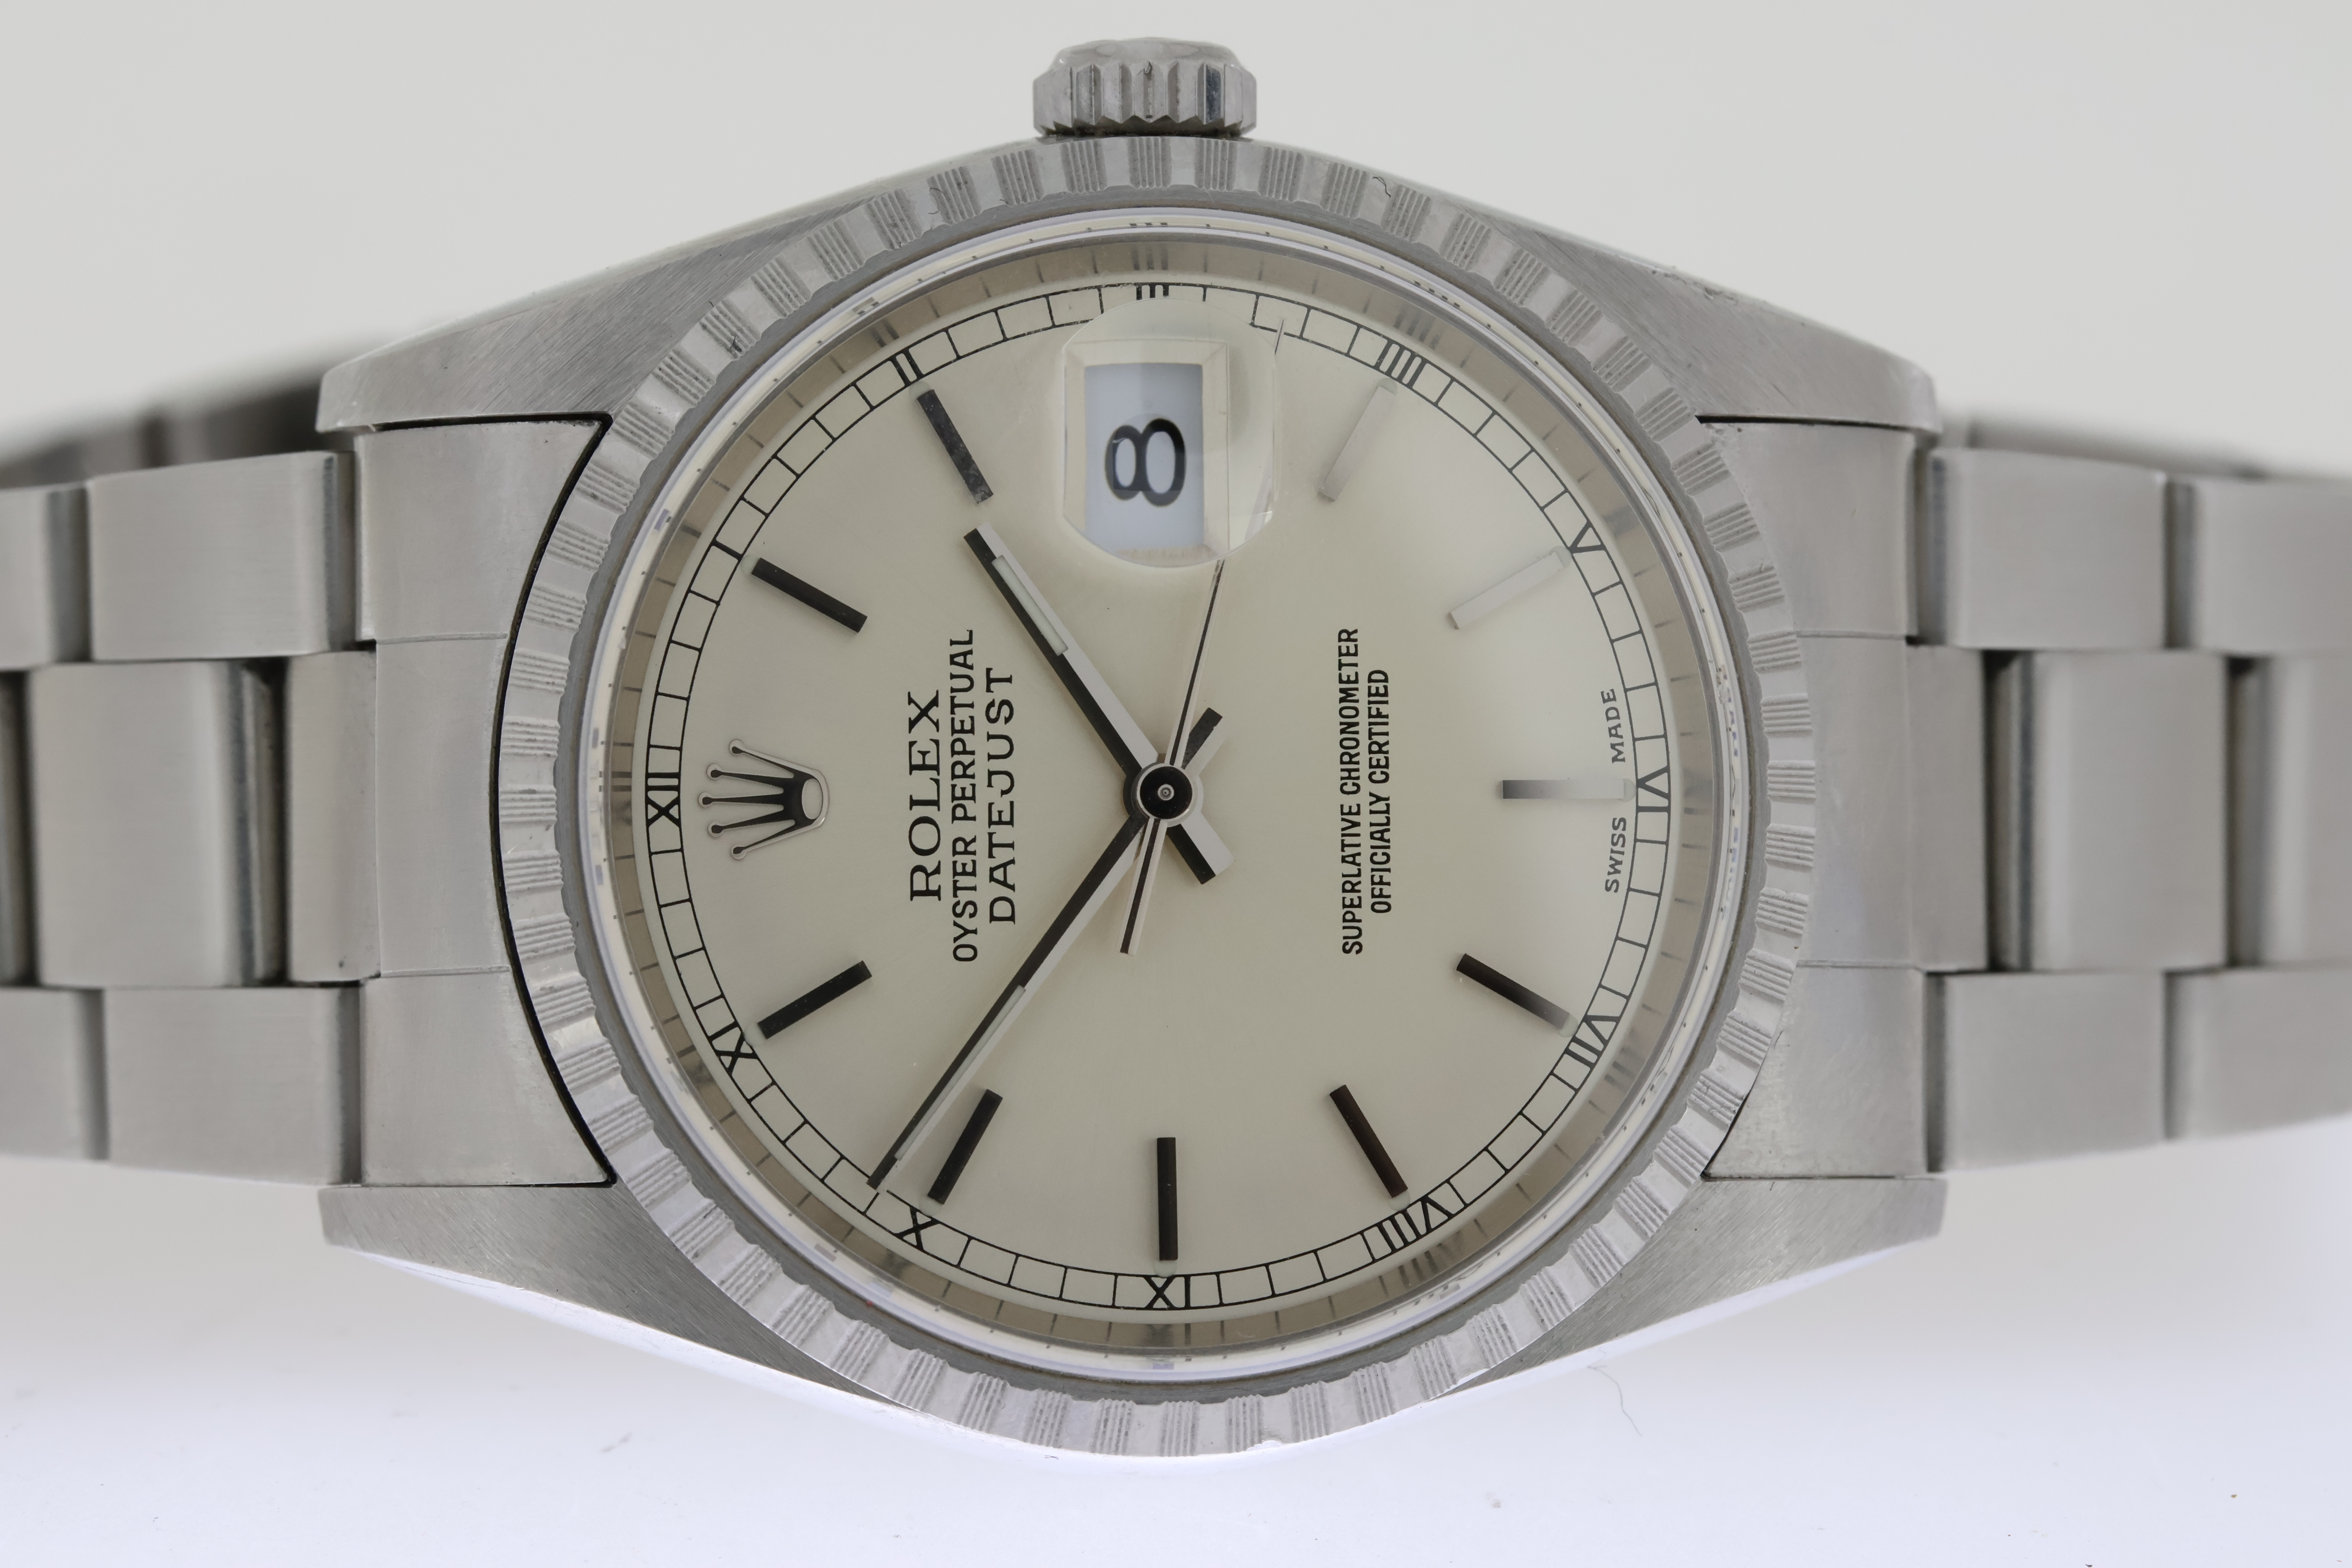 ROLEX DATEJUST 36 REFERENCE 16220 BOX AND PAPERS 2006 - Image 3 of 6